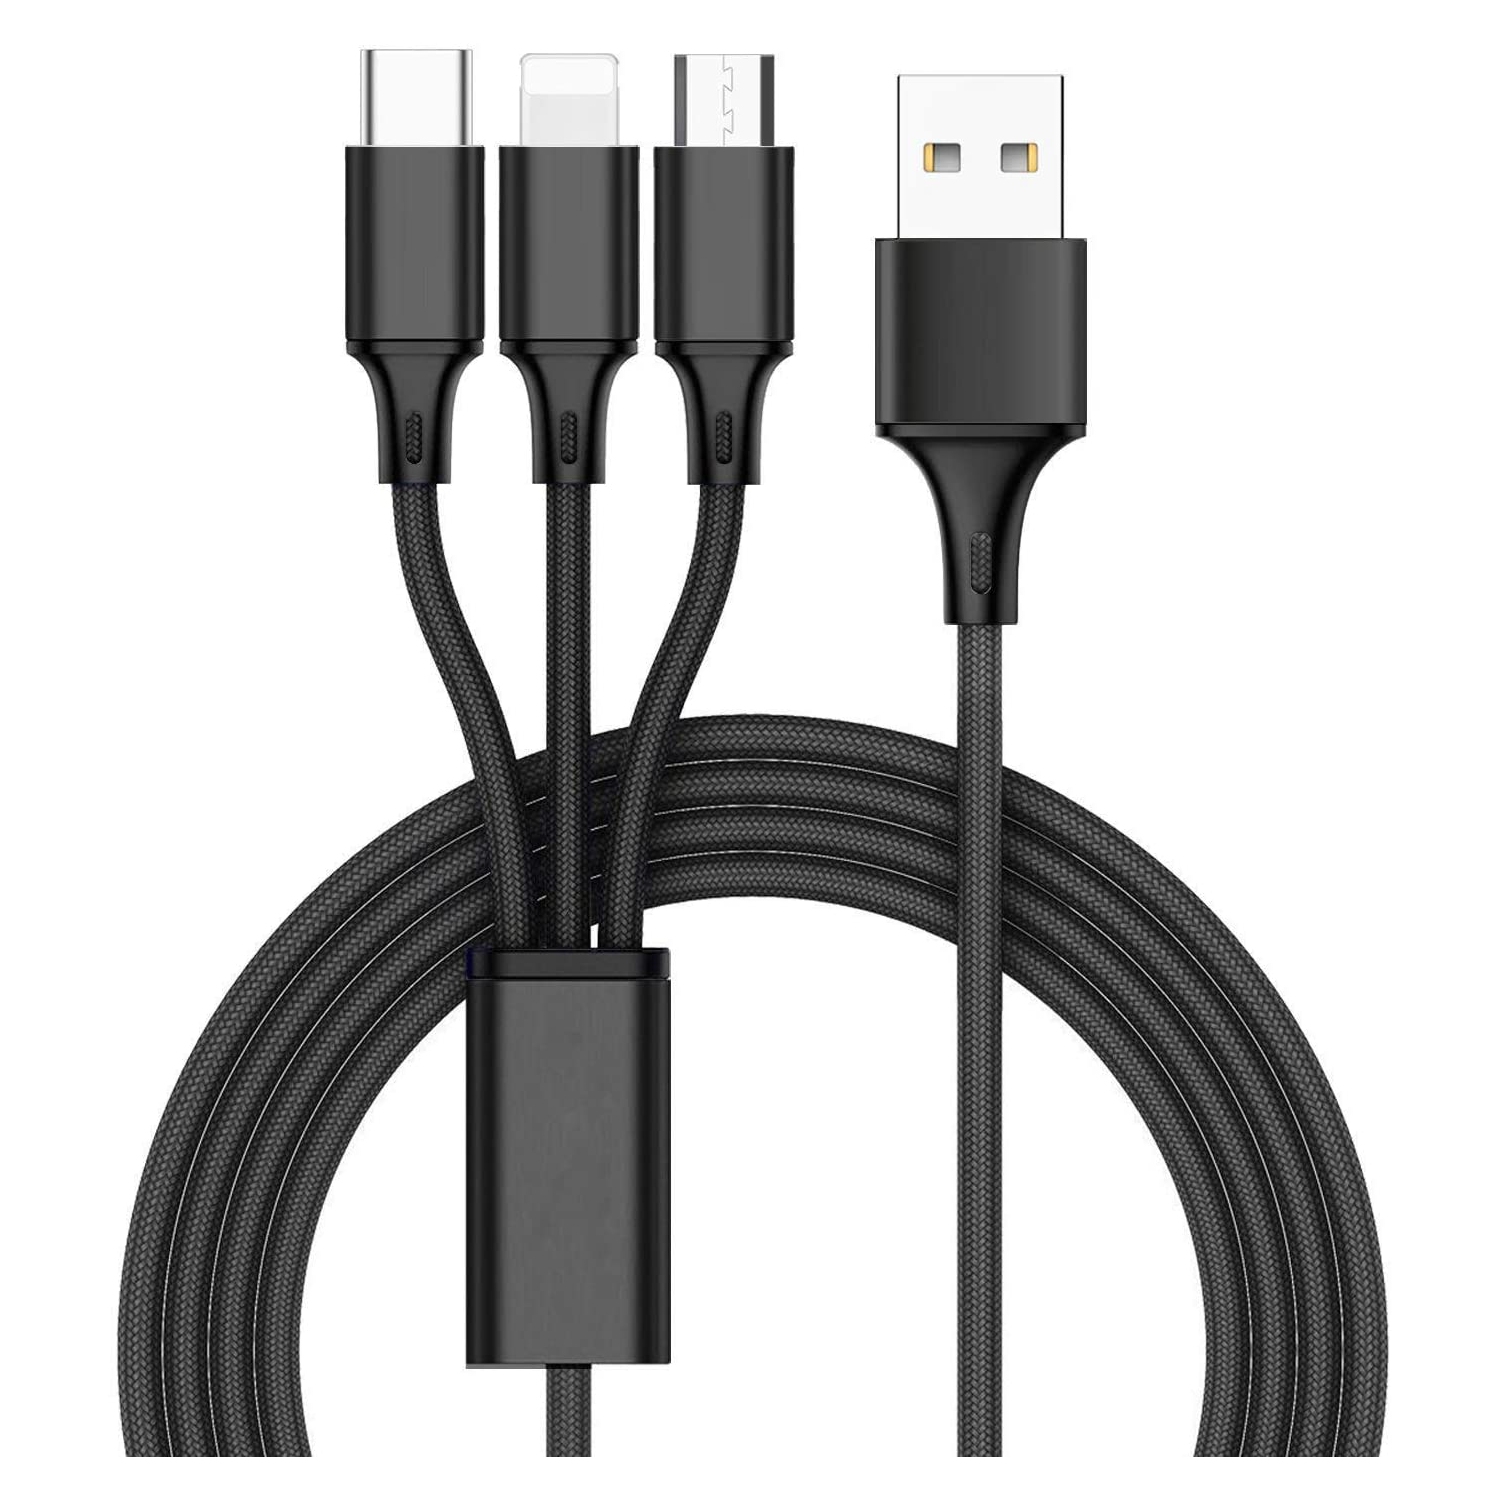 2 Pack Multi USB Charger Cable-Z 3 in 1 USB Fast Charging Cable USB to Type c/Micro USB Charging Cord Compatible Samsung Galaxy S9 S8 Note 8, Pixel, LG V30 and More Black